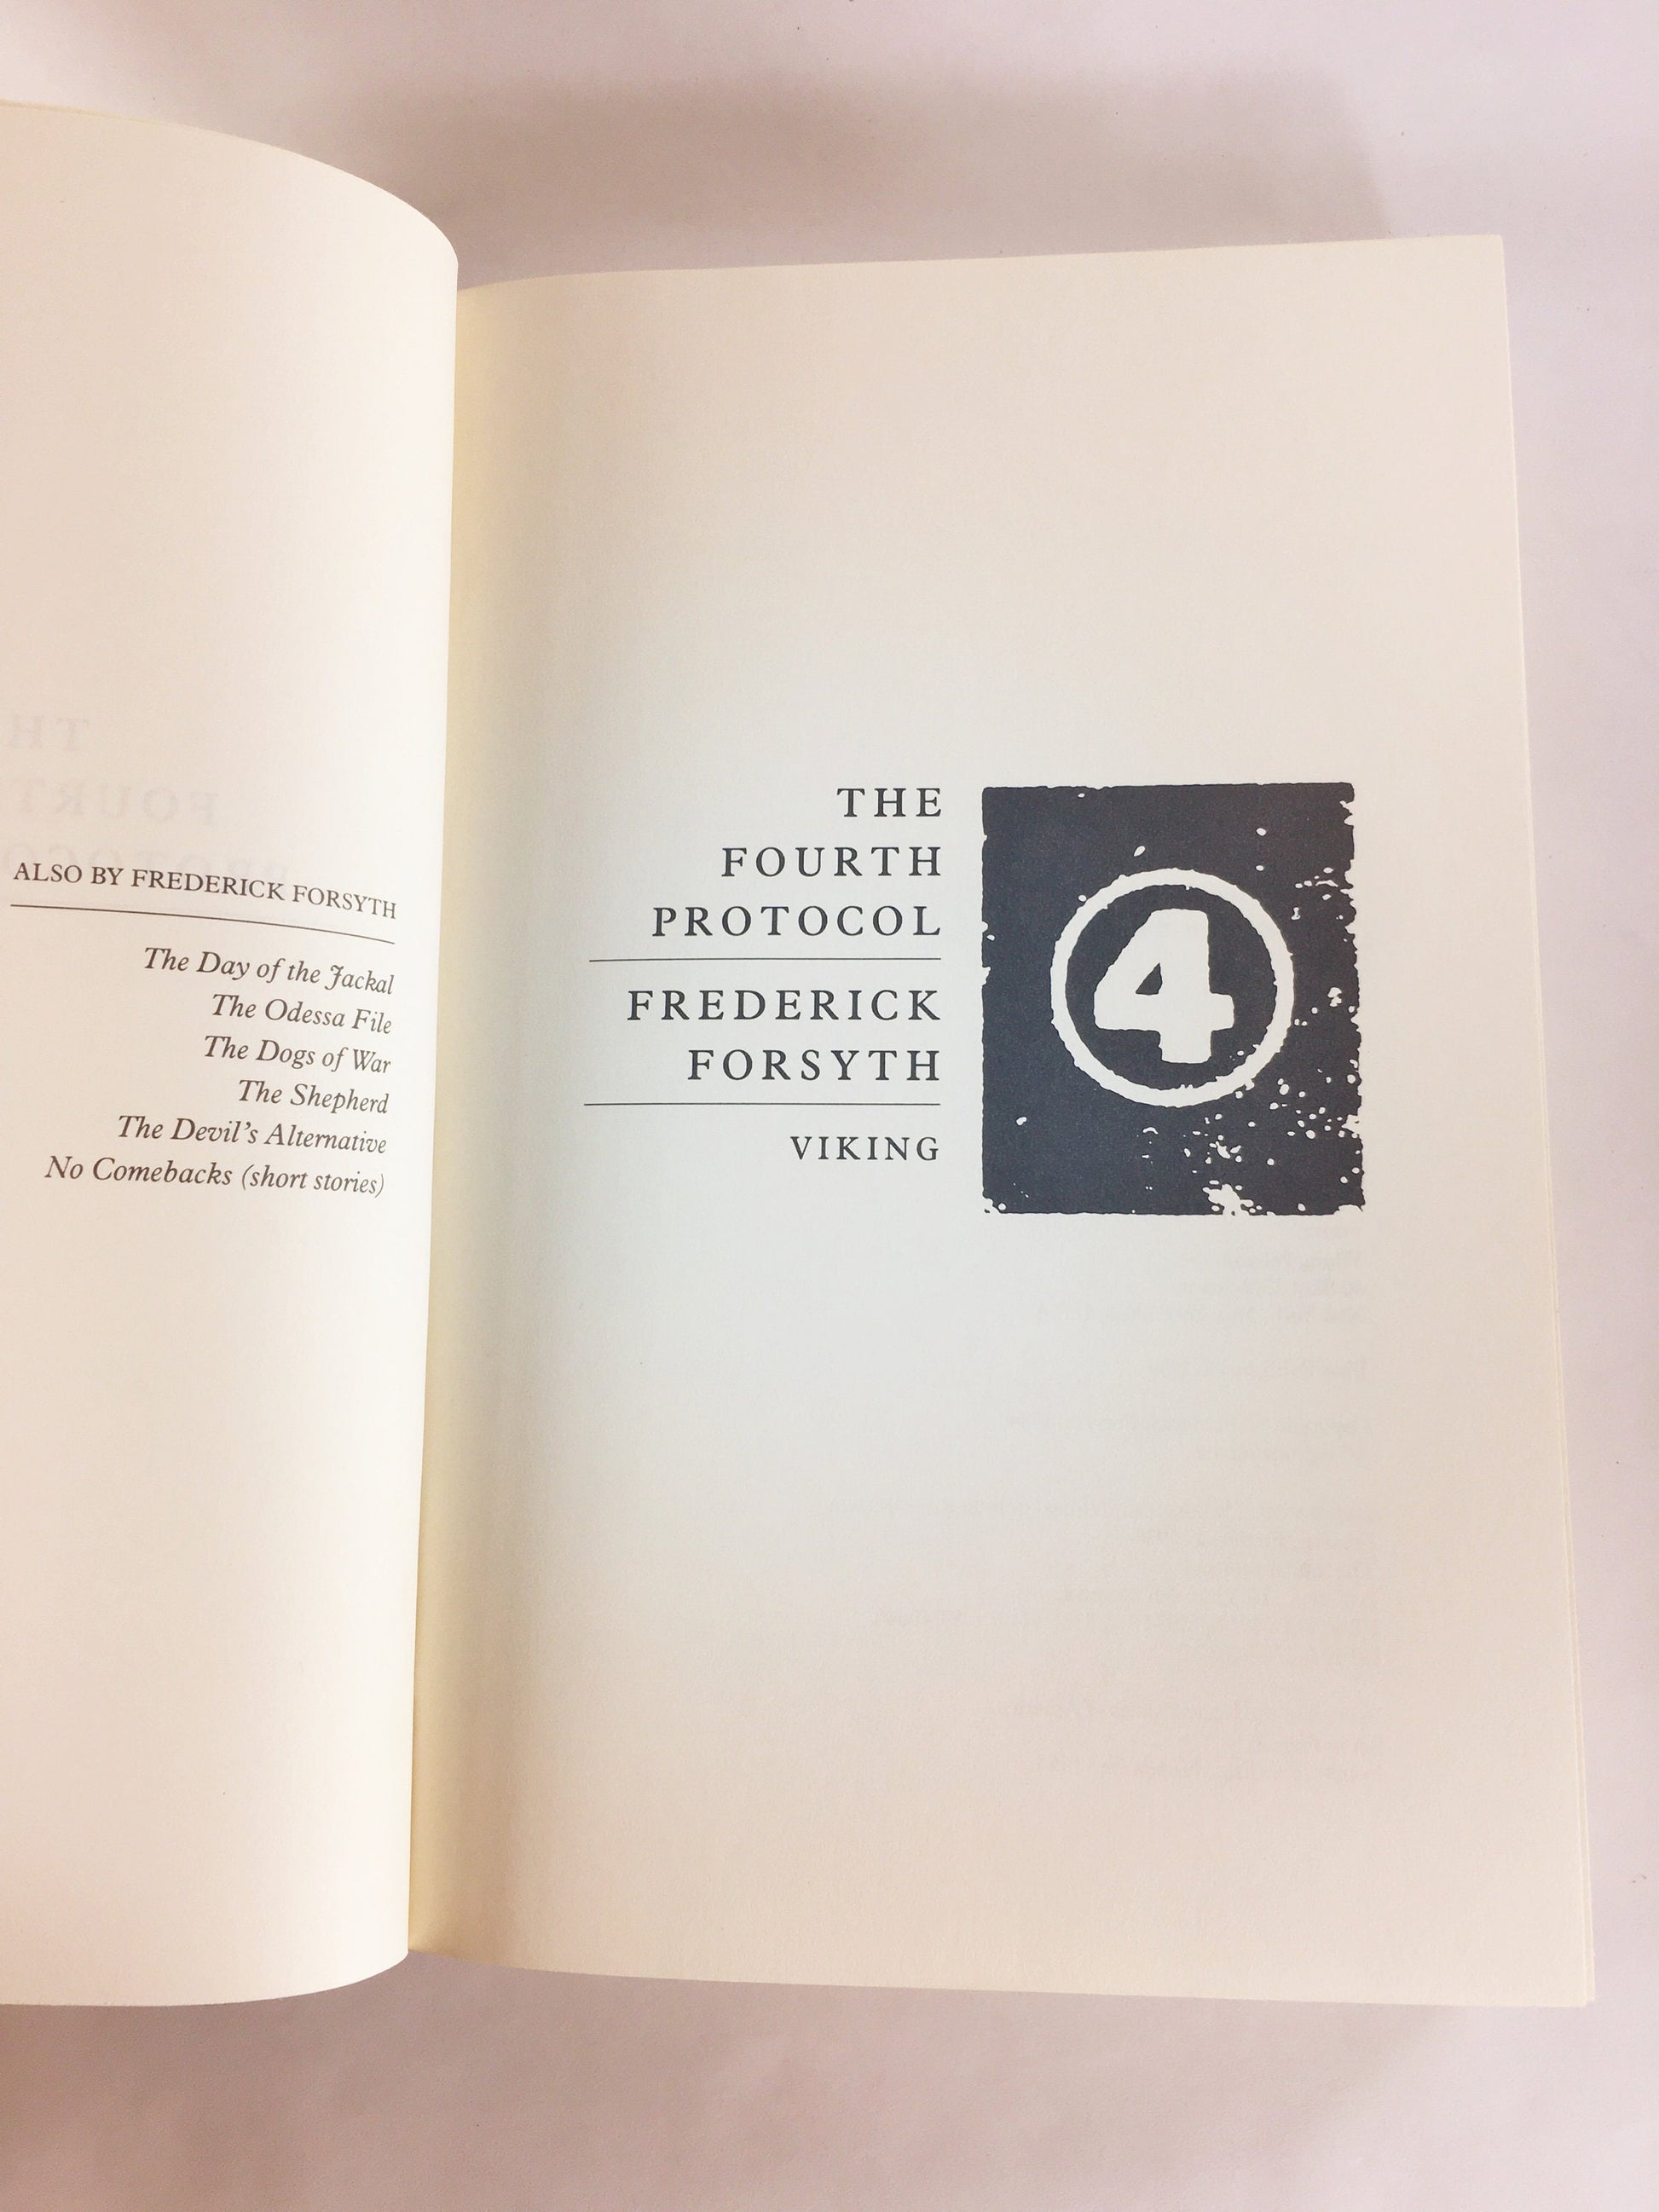 1984 Fourth Protocol by Frederick Forsyth EARLY PRINTING vintage book about stolen top secret documents and the M15 in London England.